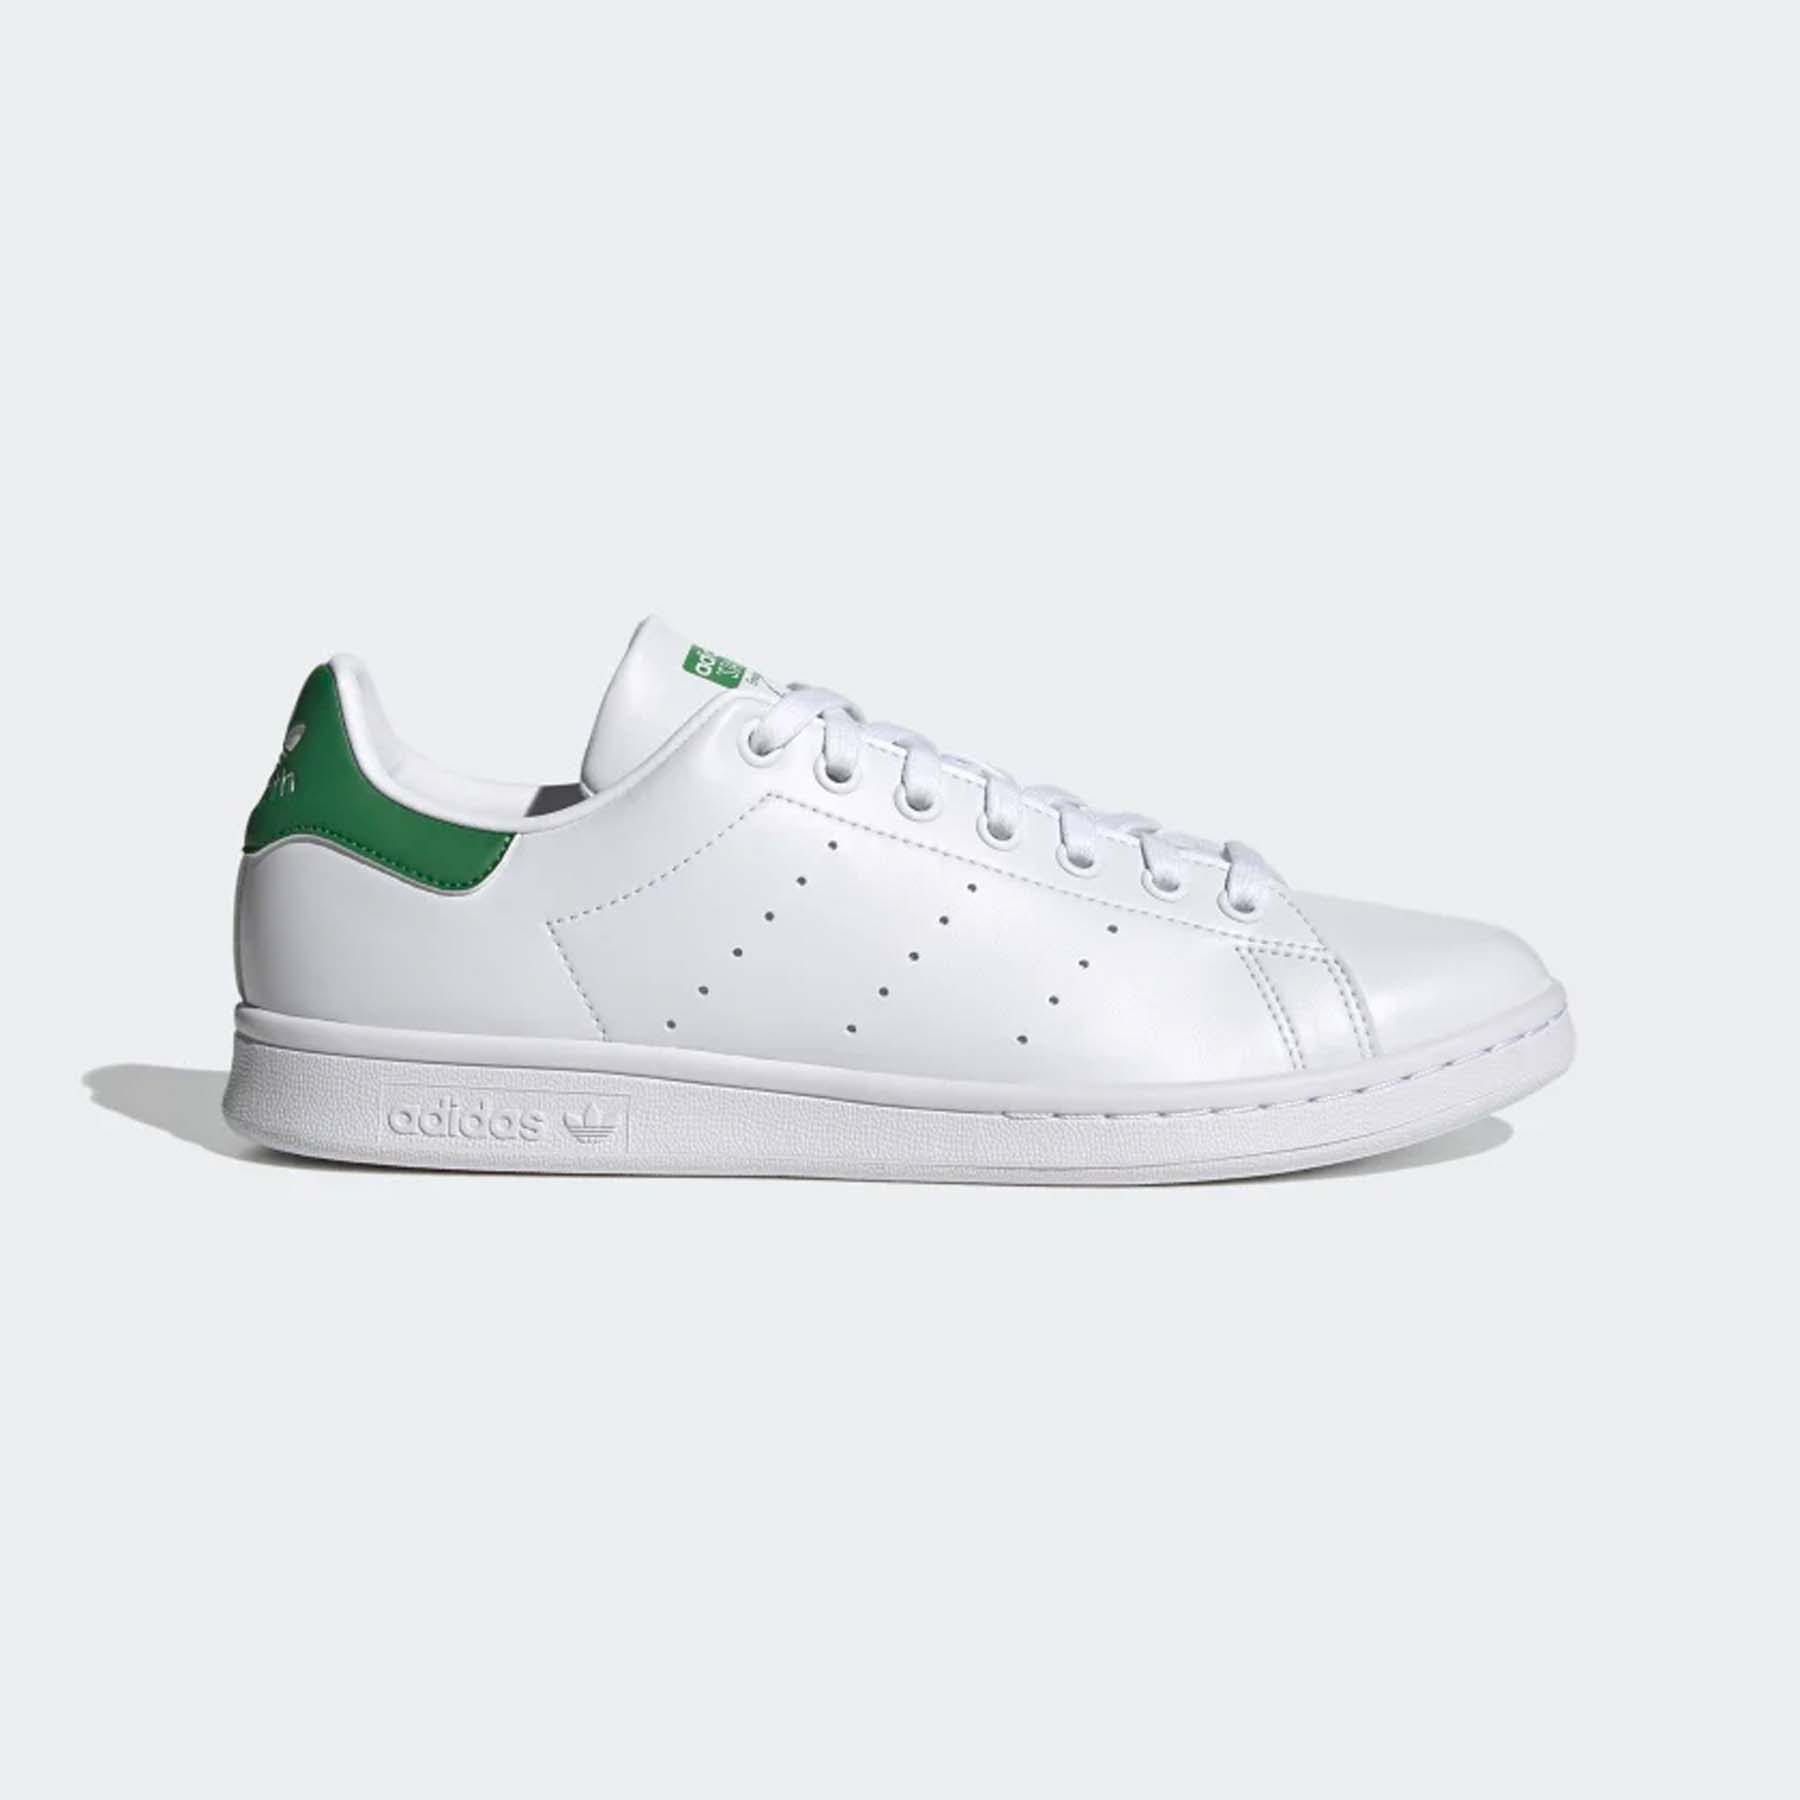 10 white sneakers every man should own